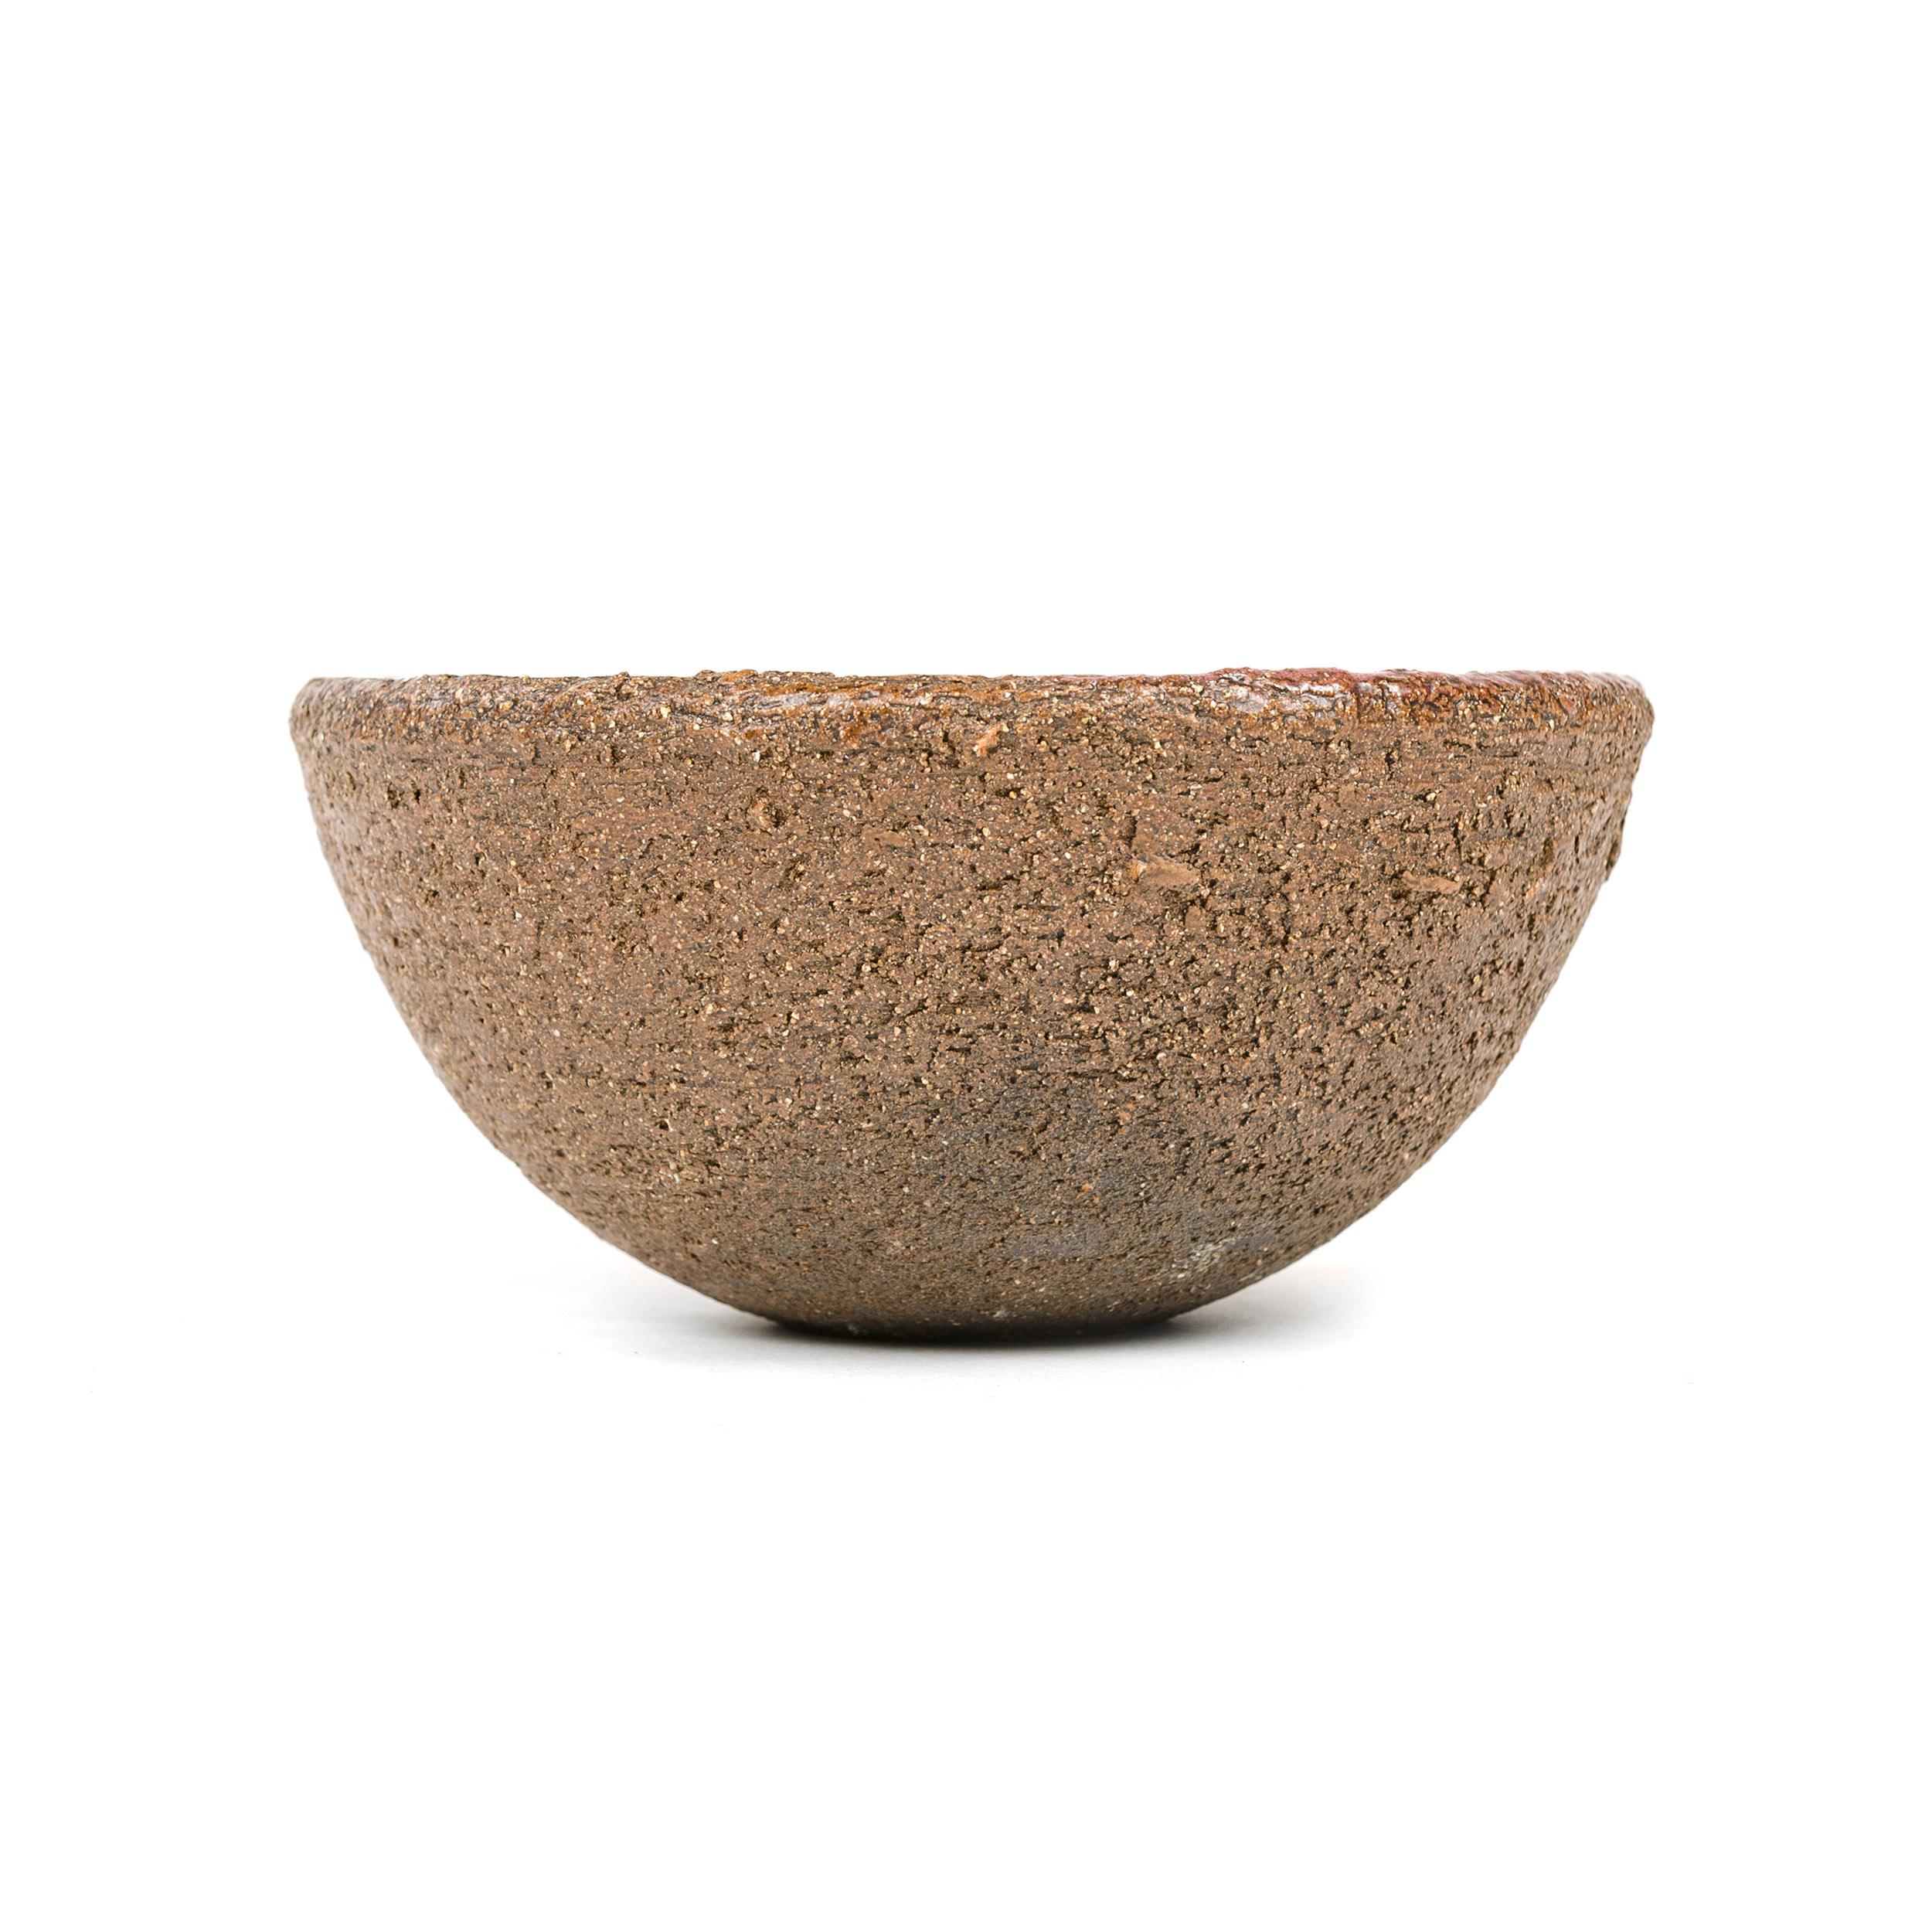 A small, hand-thrown, groggy stoneware bowl with half-dipped glossy rose glazed interior. Marked 282 H, Italy.